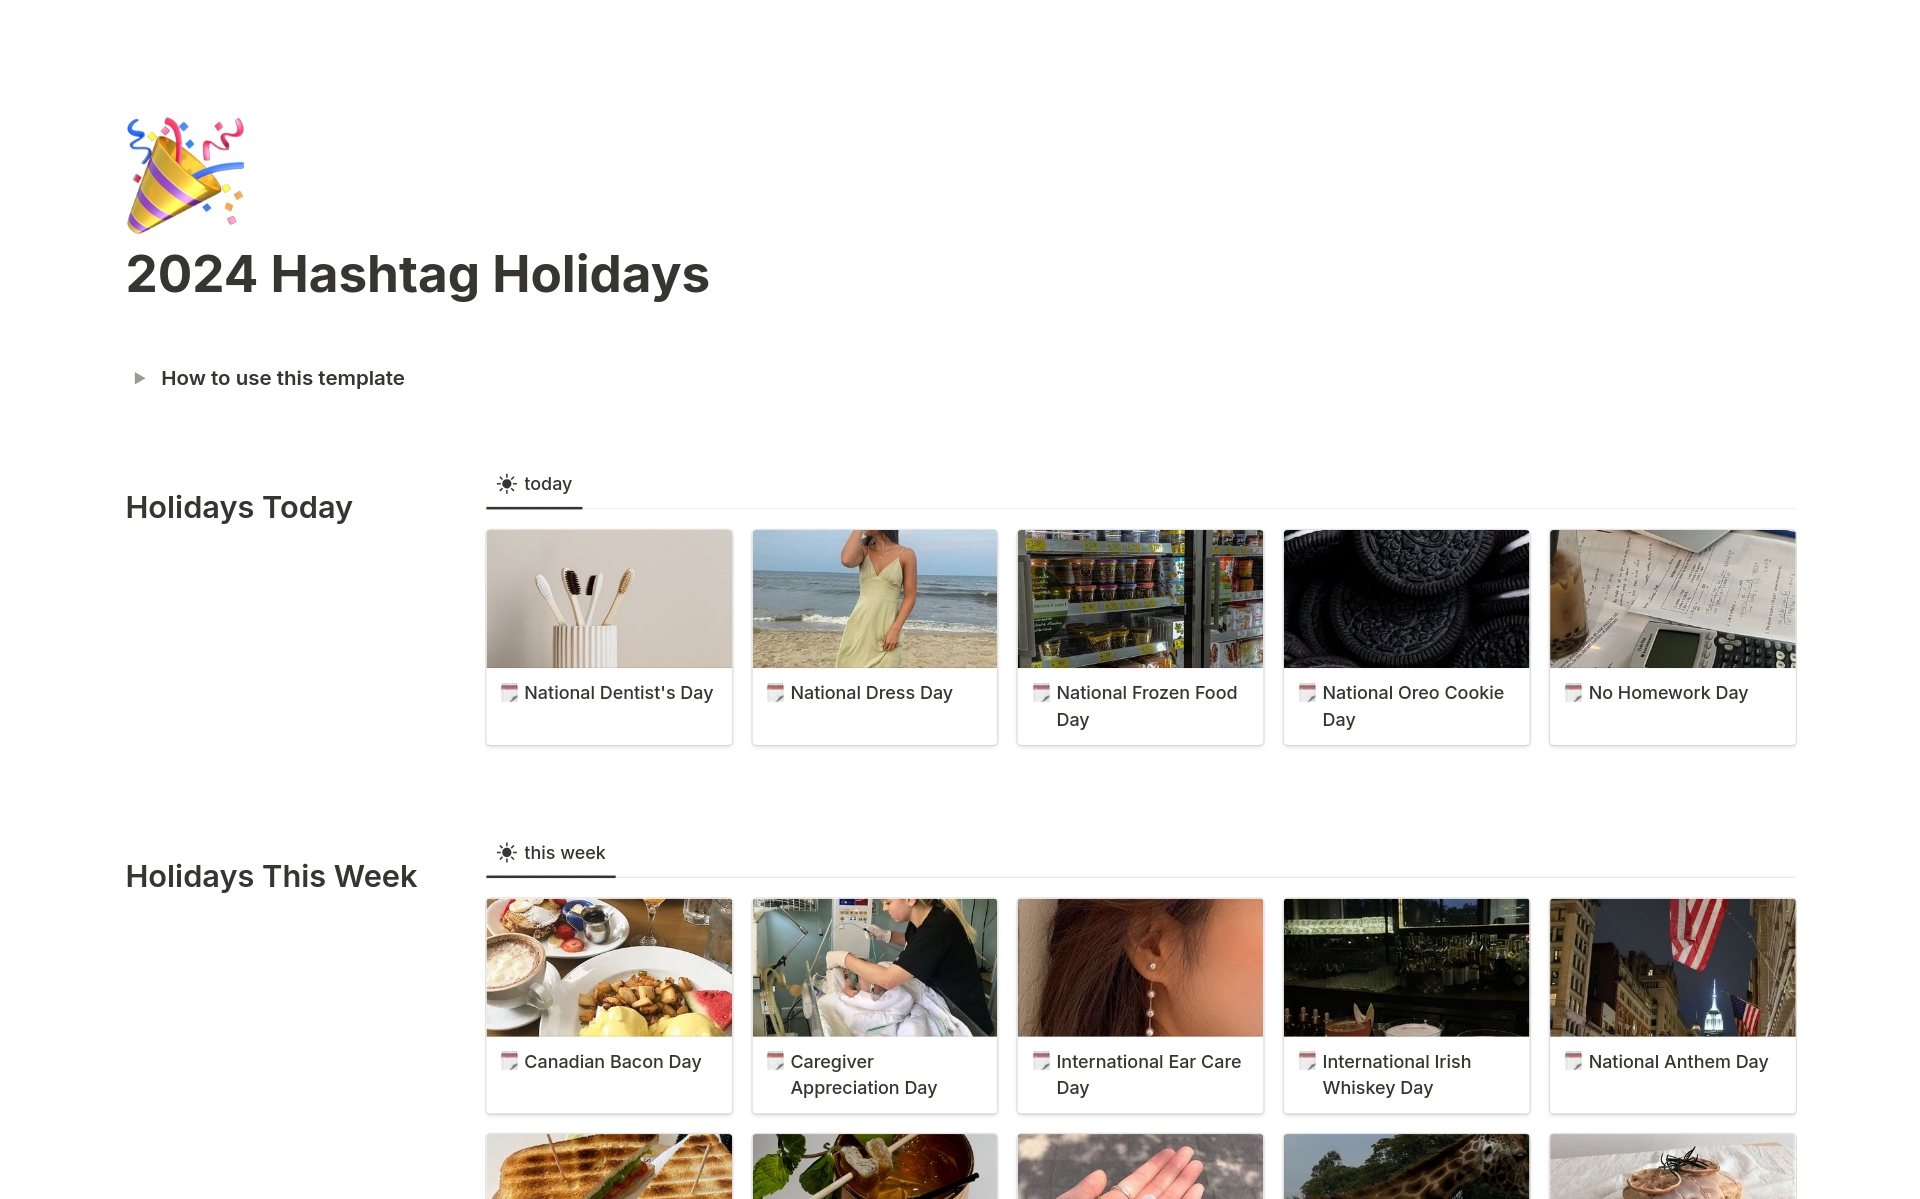 Unlock Your Social Media Potential with the Ultimate Hashtag Holidays Template! 🚀